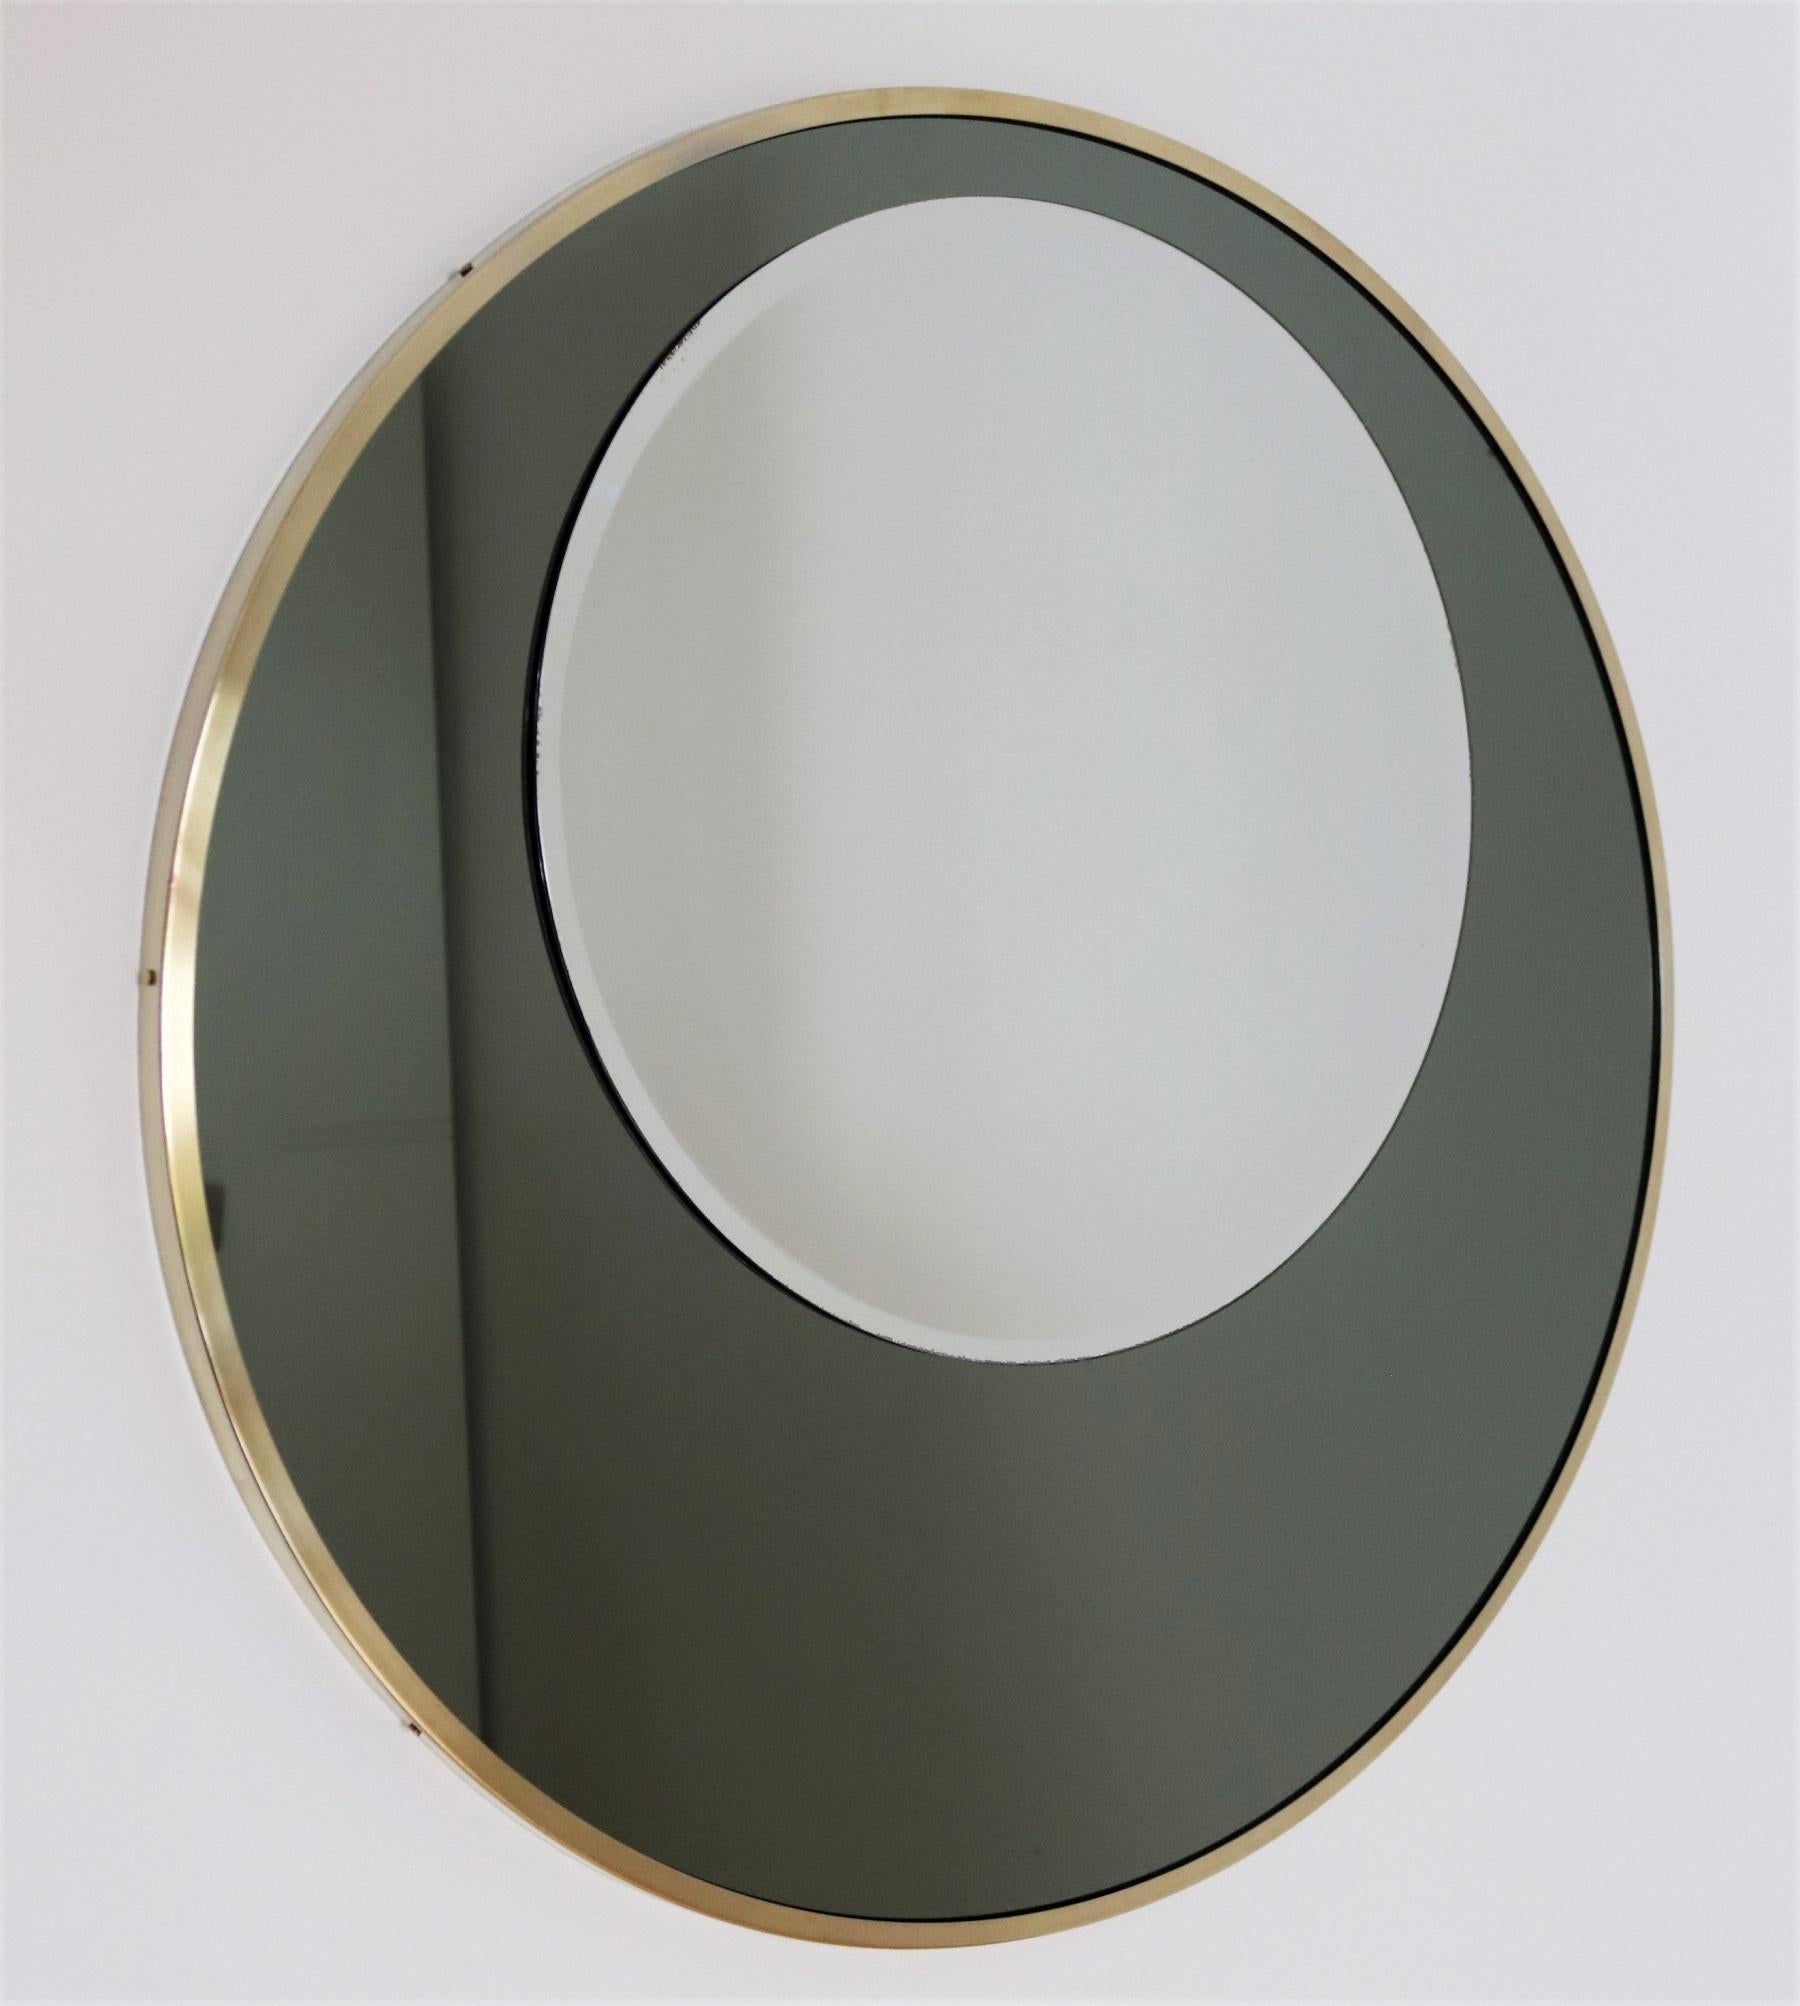 Gorgeous wall or console mirror with two round superimposed mirror glasses and brass frame.
The mirror is made in Italy during the 1970s.
The lower bigger mirror is made of olive green color, the upper smaller mirror is normal not colored mirror